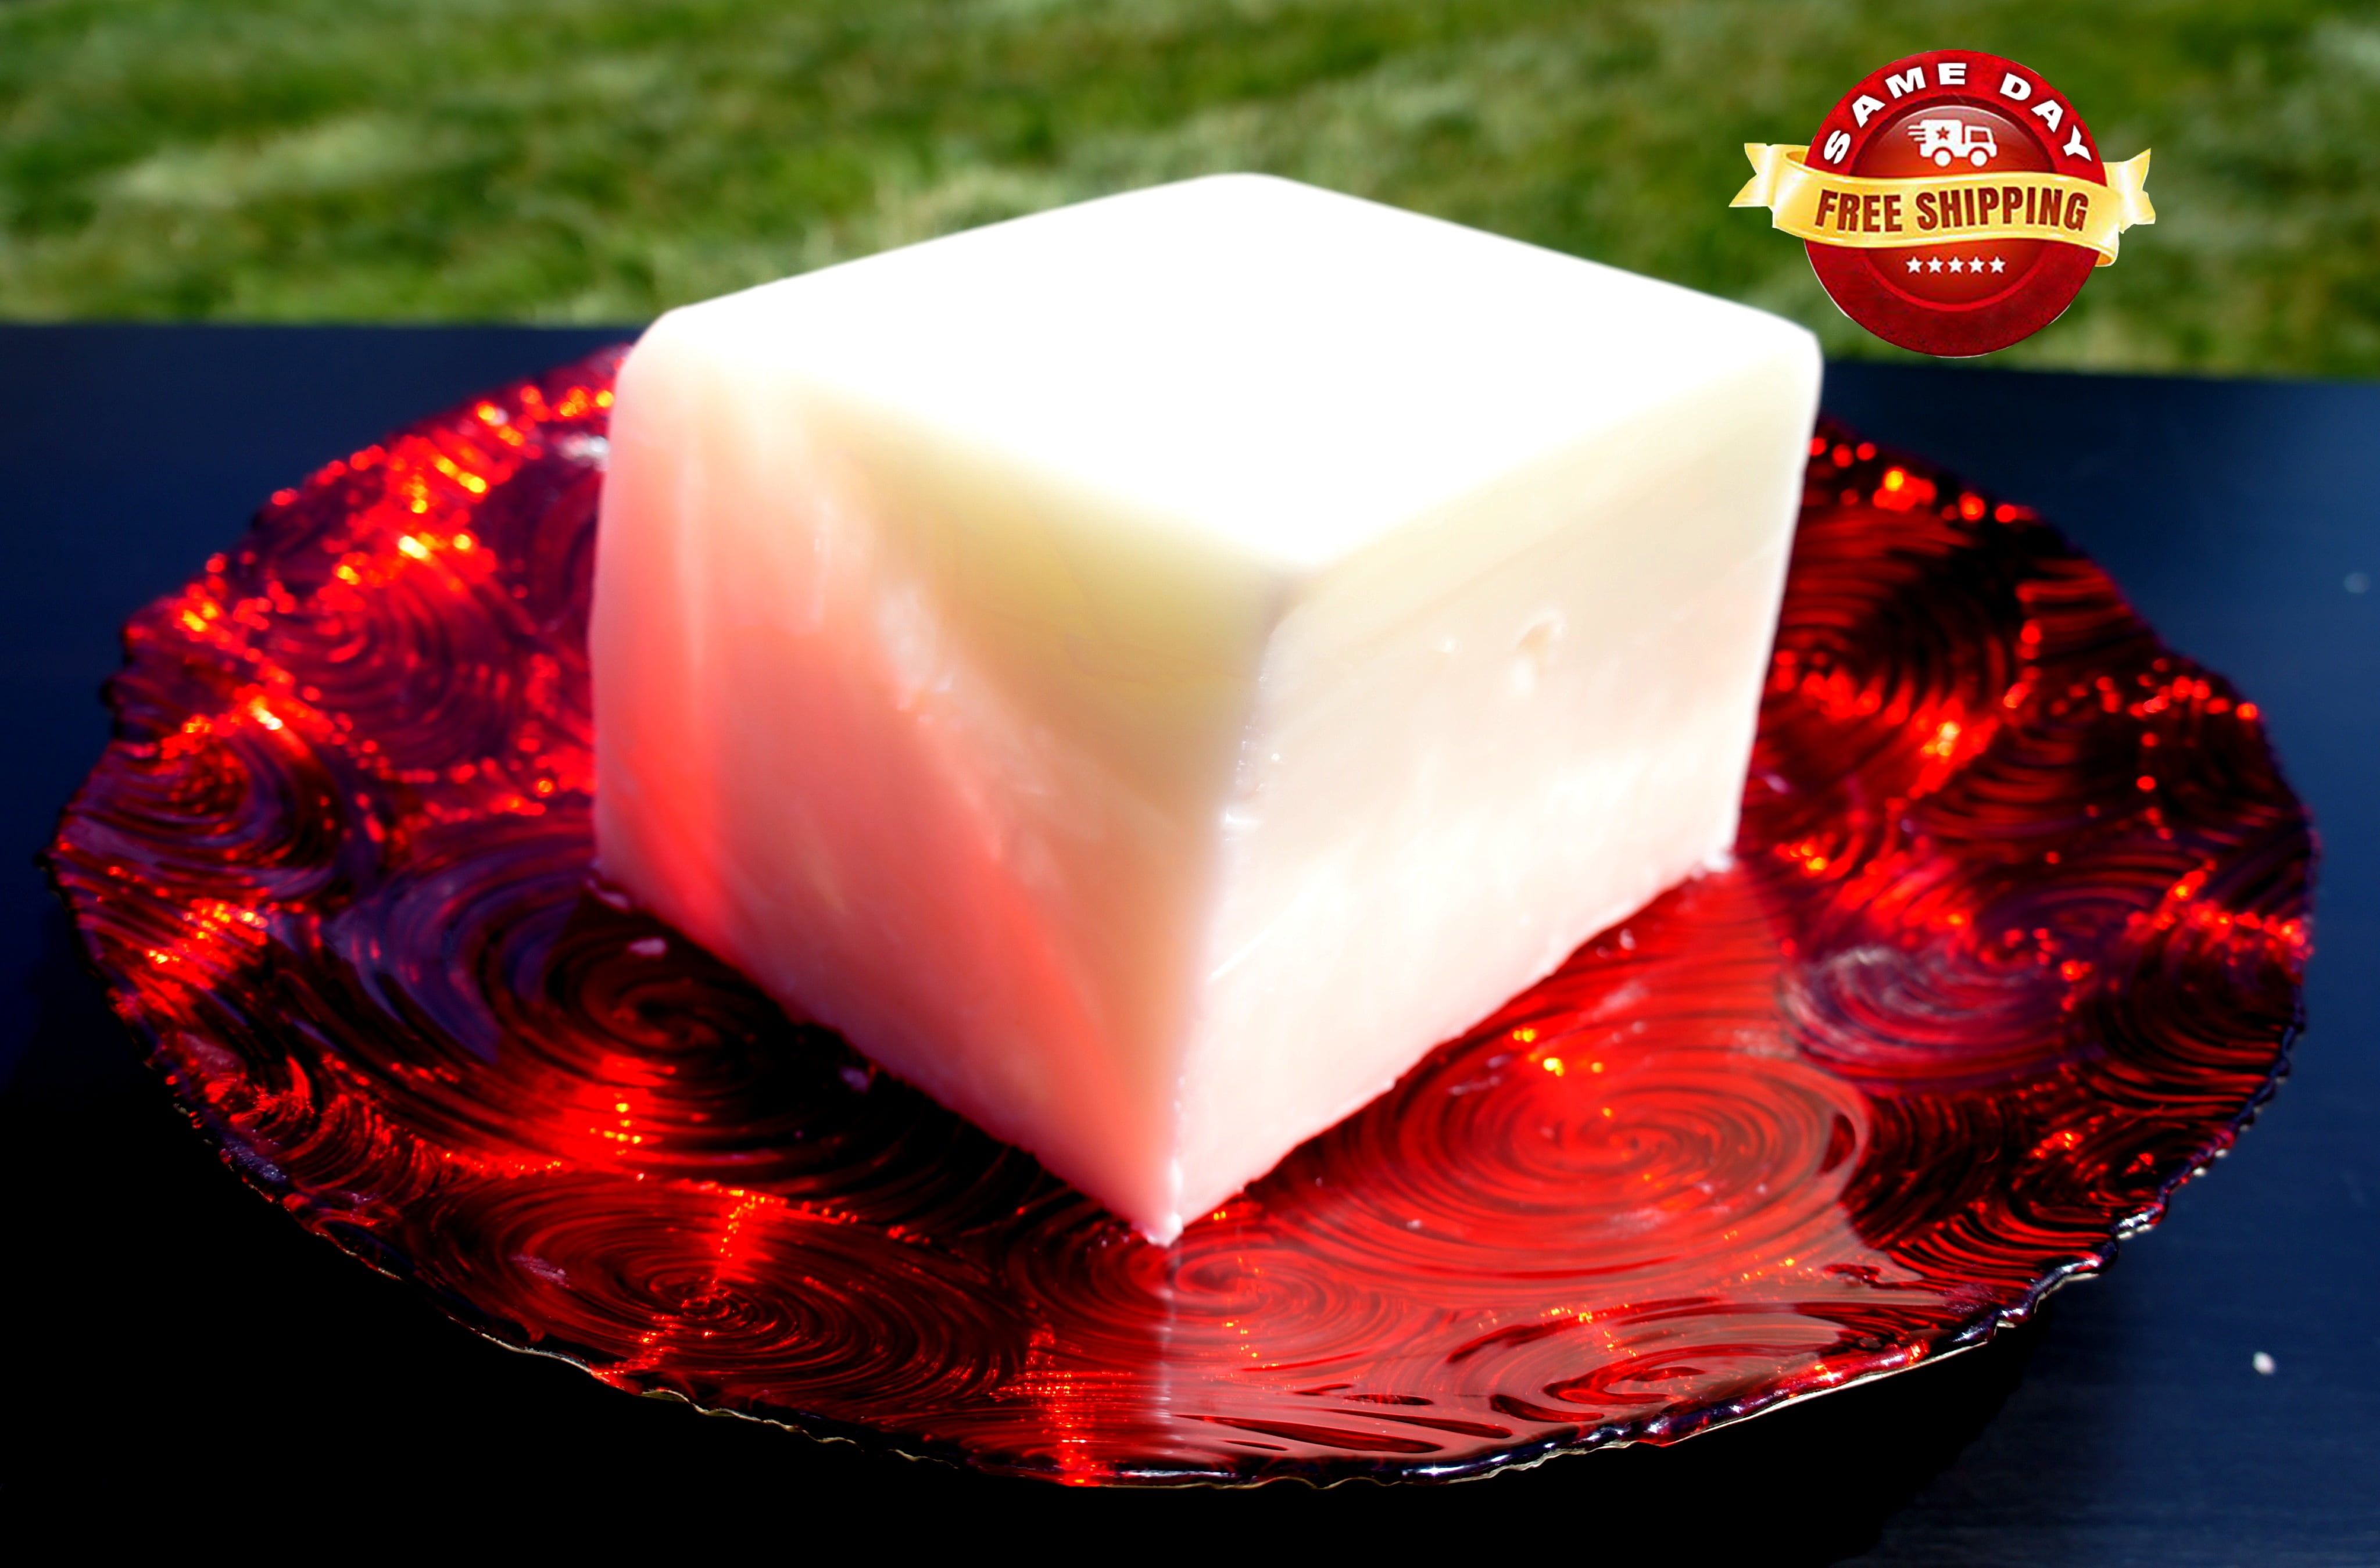 Melt & Pour All Natural Bar for The Best Result Size 24 lb 100% Organic Goats Milk & Glycerin Soap Base by Velona 